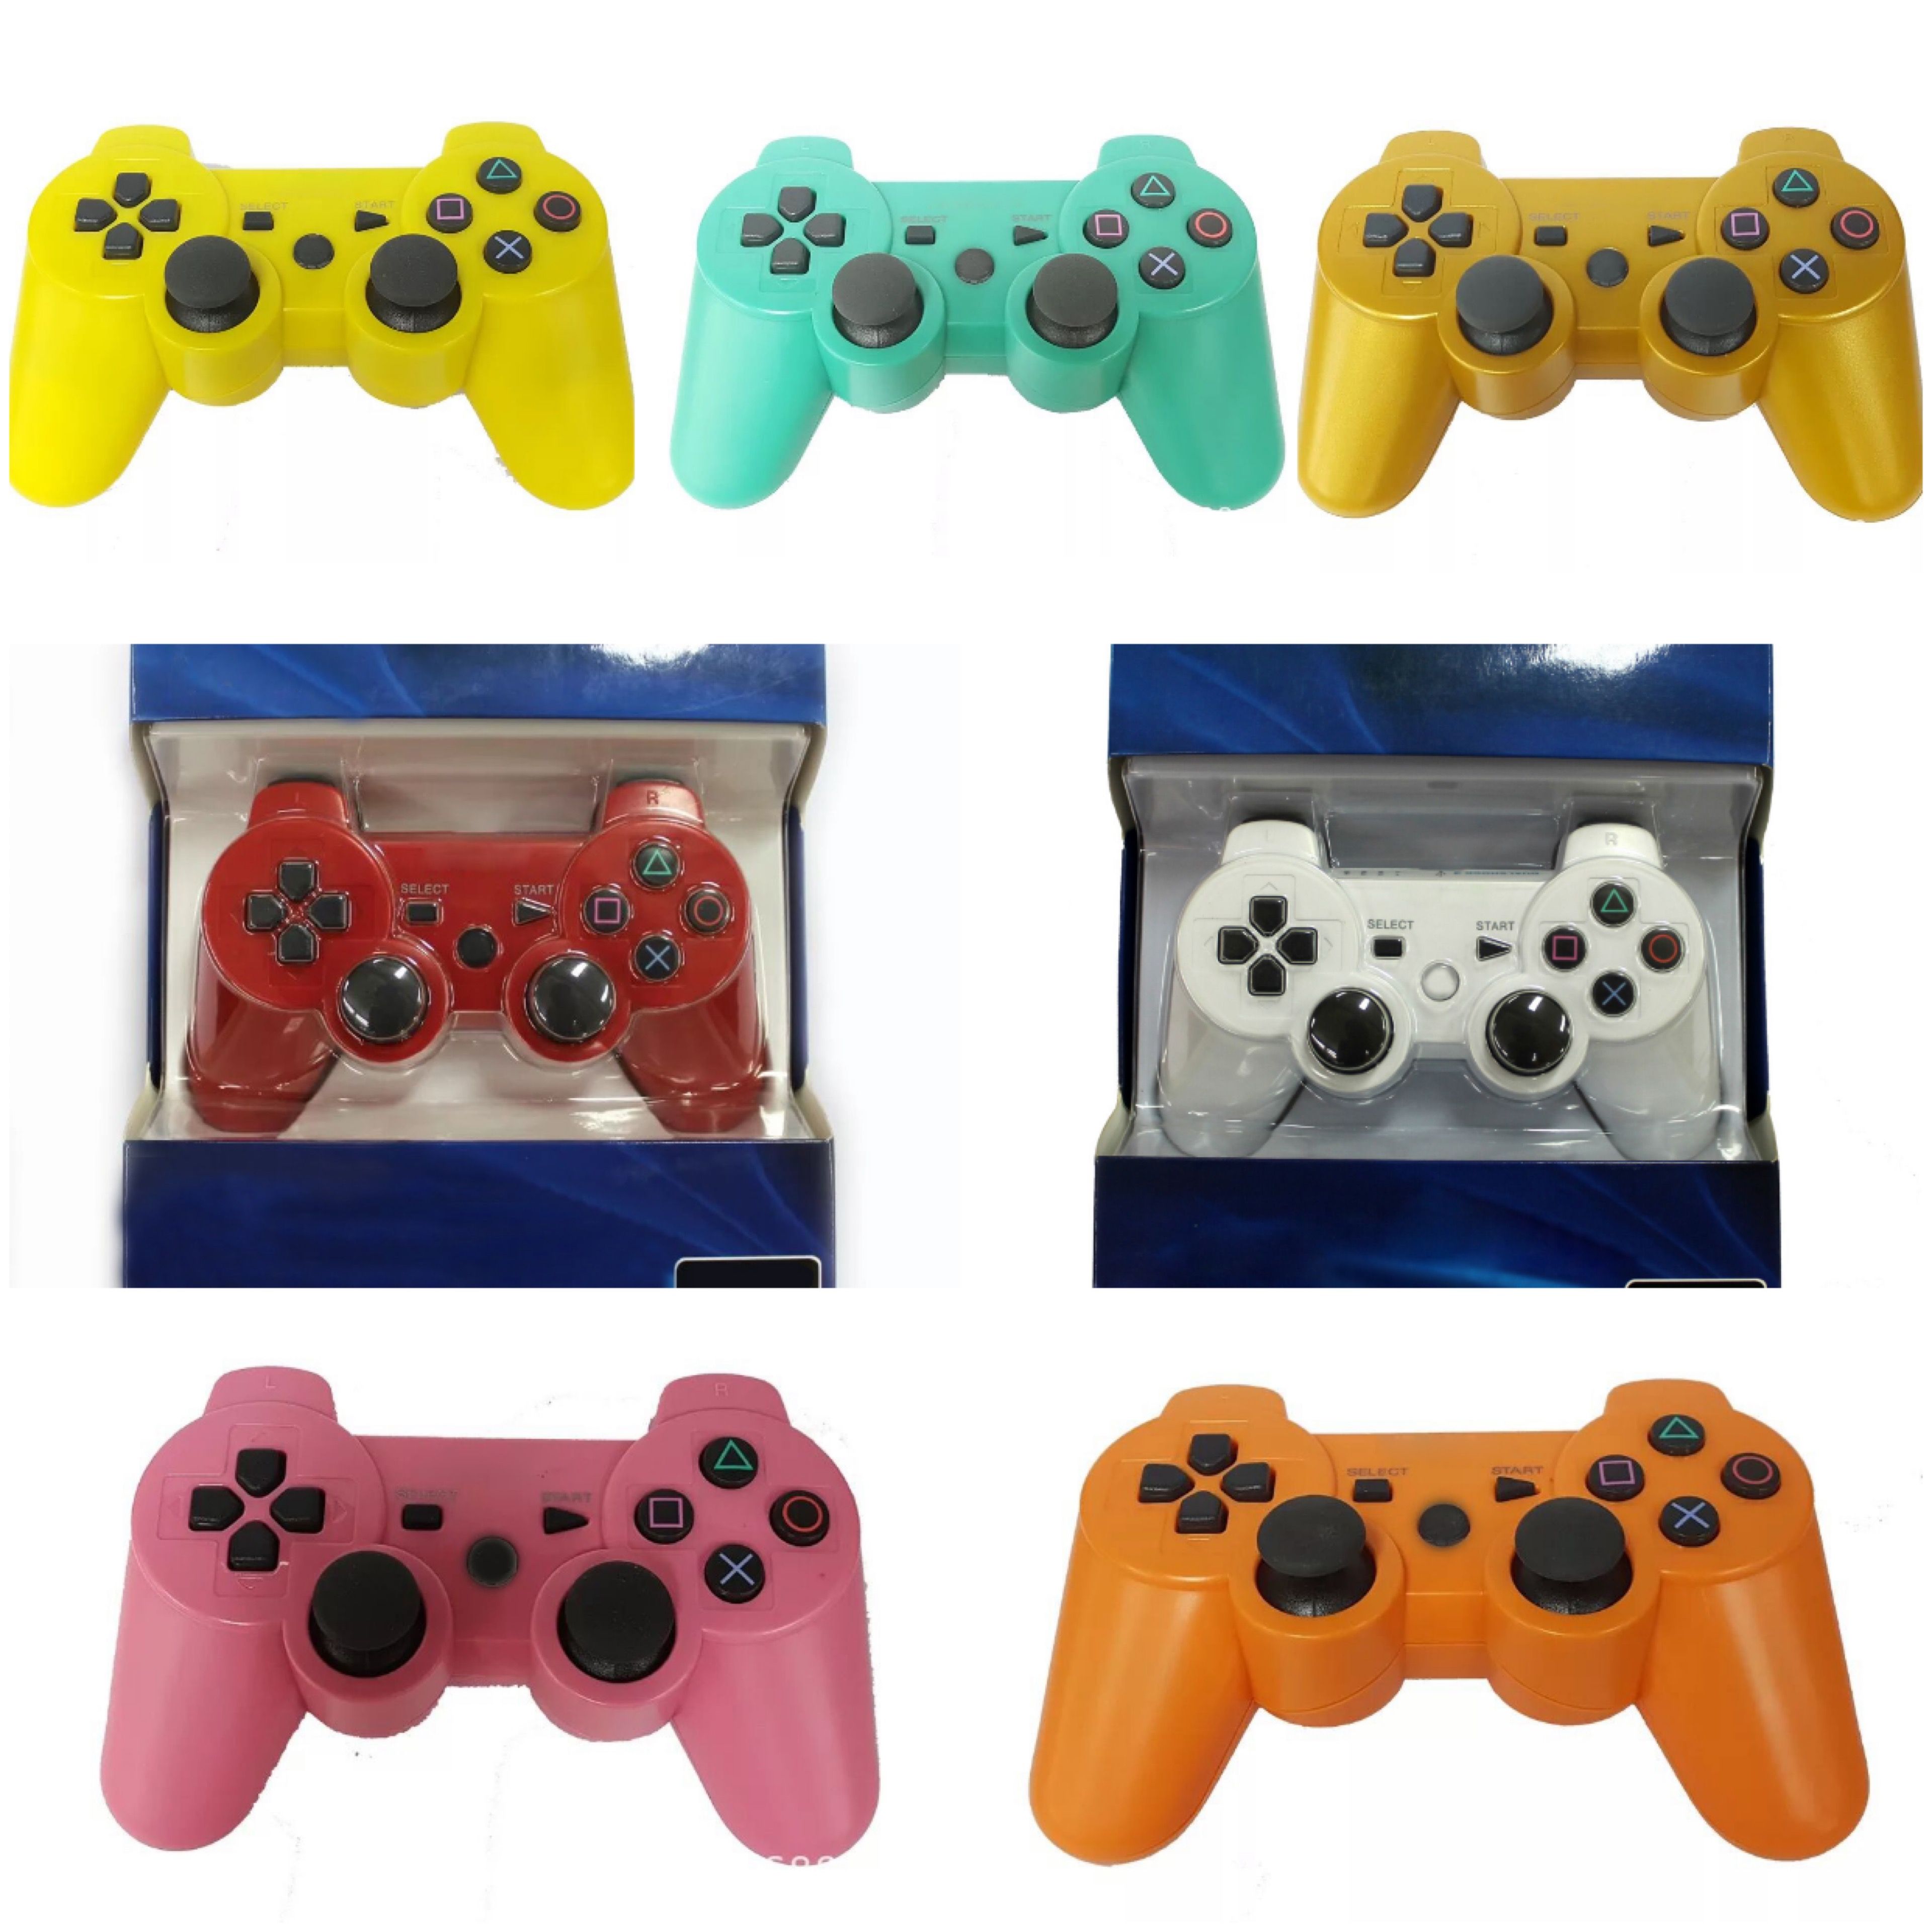 Mixed colors (for PS3)